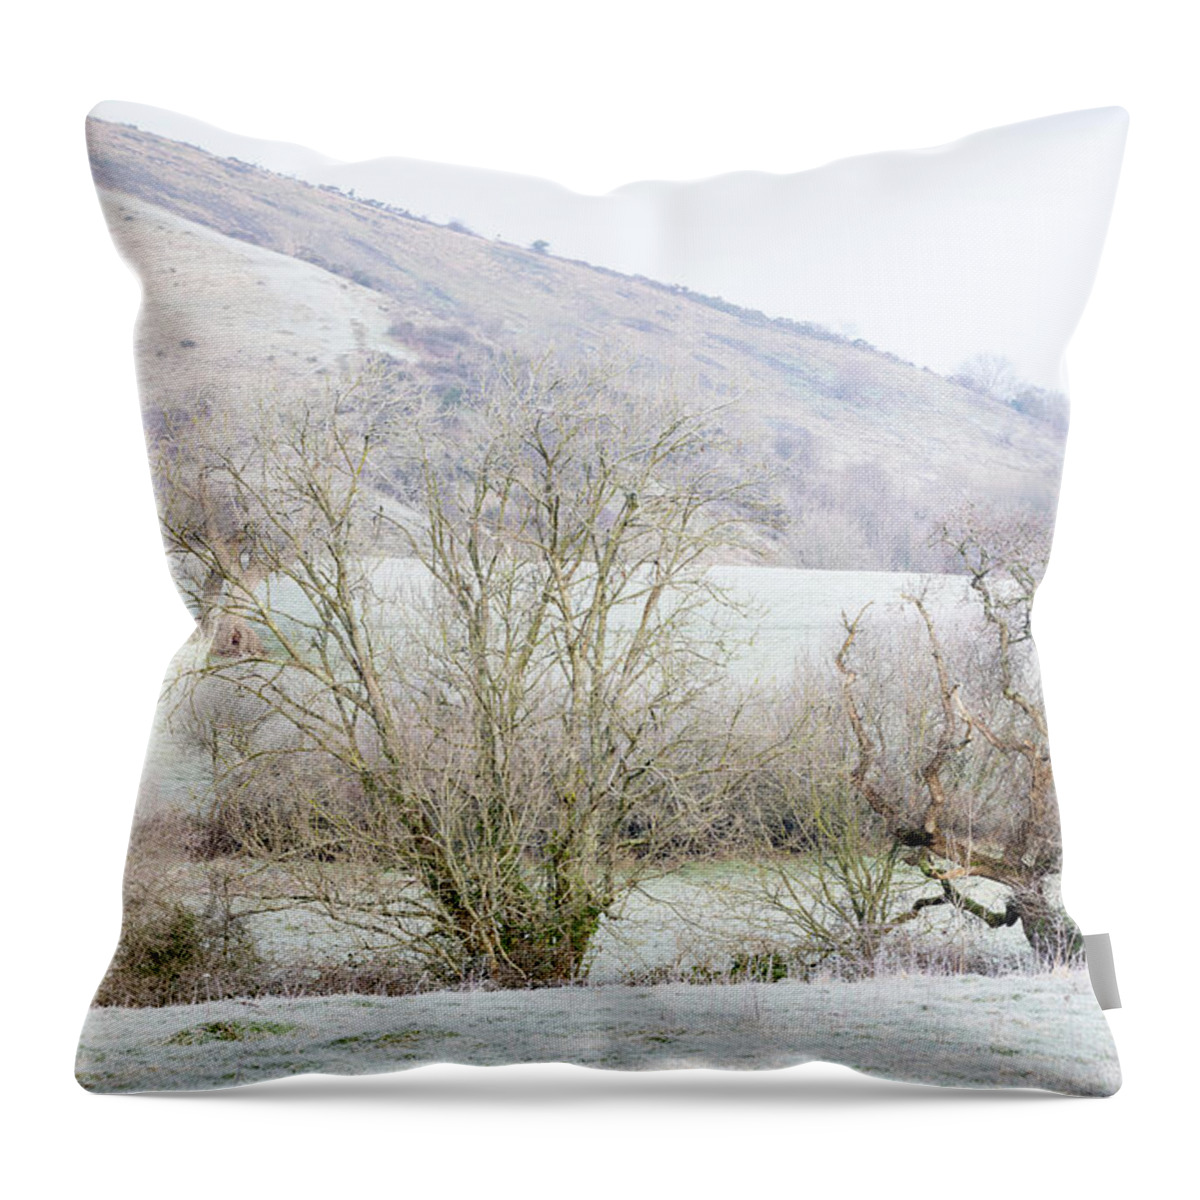 Frosty Throw Pillow featuring the photograph A Frosty Morning by Tanya C Smith